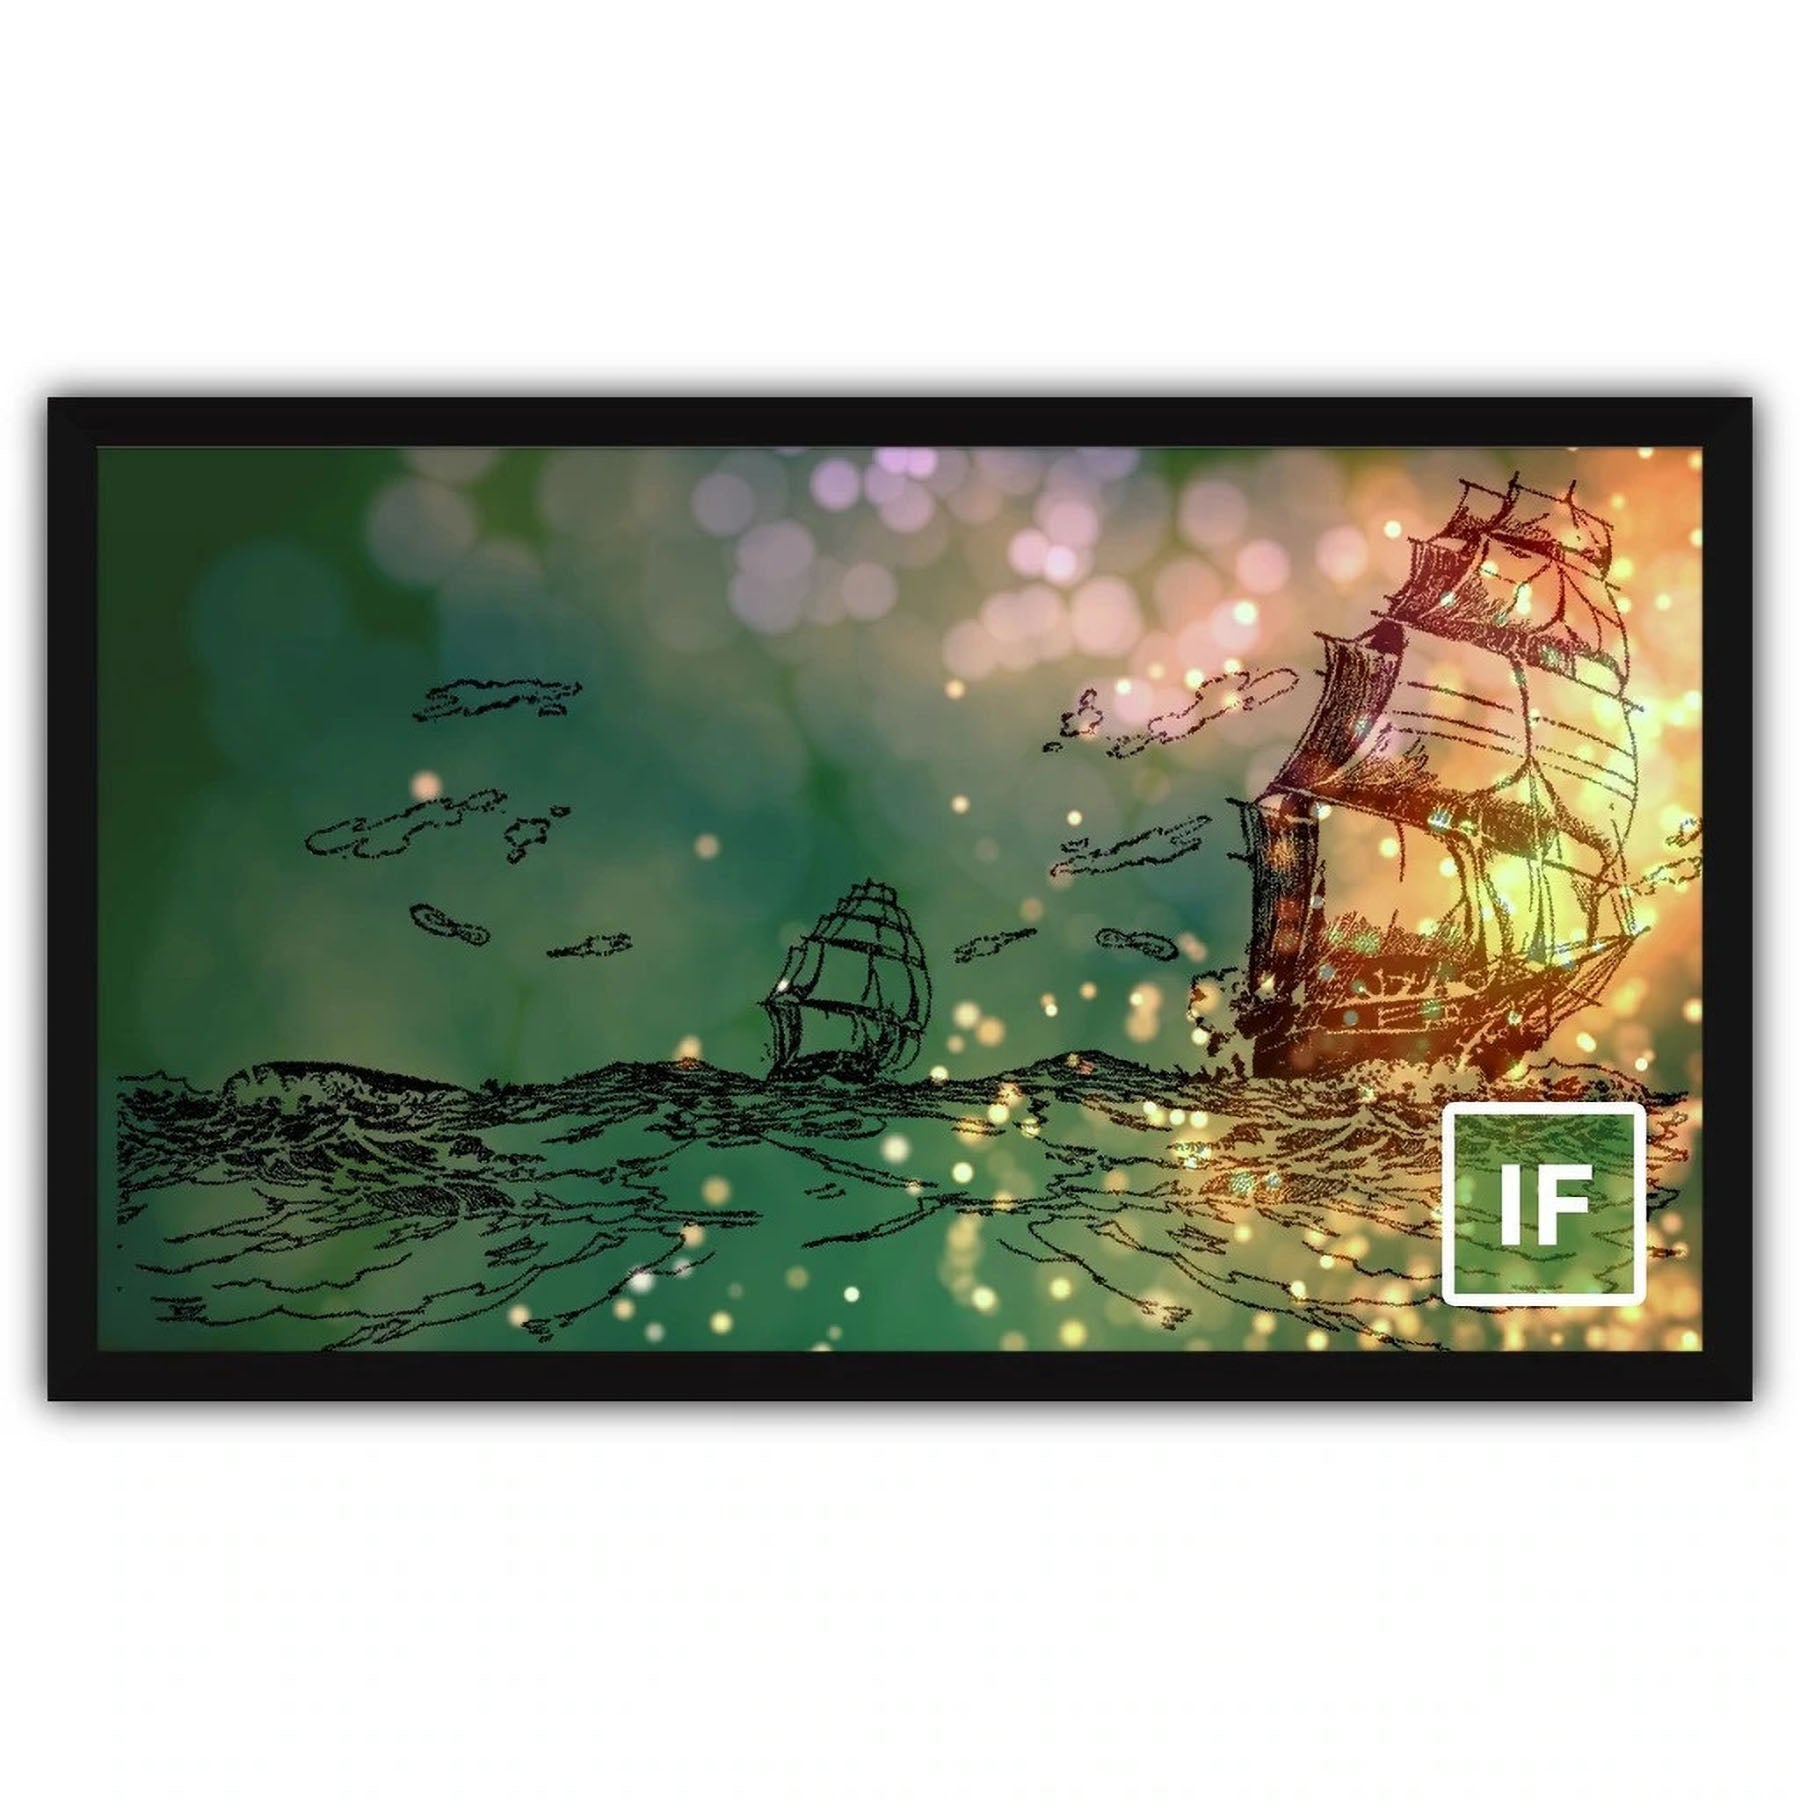 Severtson Screens Impression Series 2.35:1 141-inch Fixed Frame Projection Screen